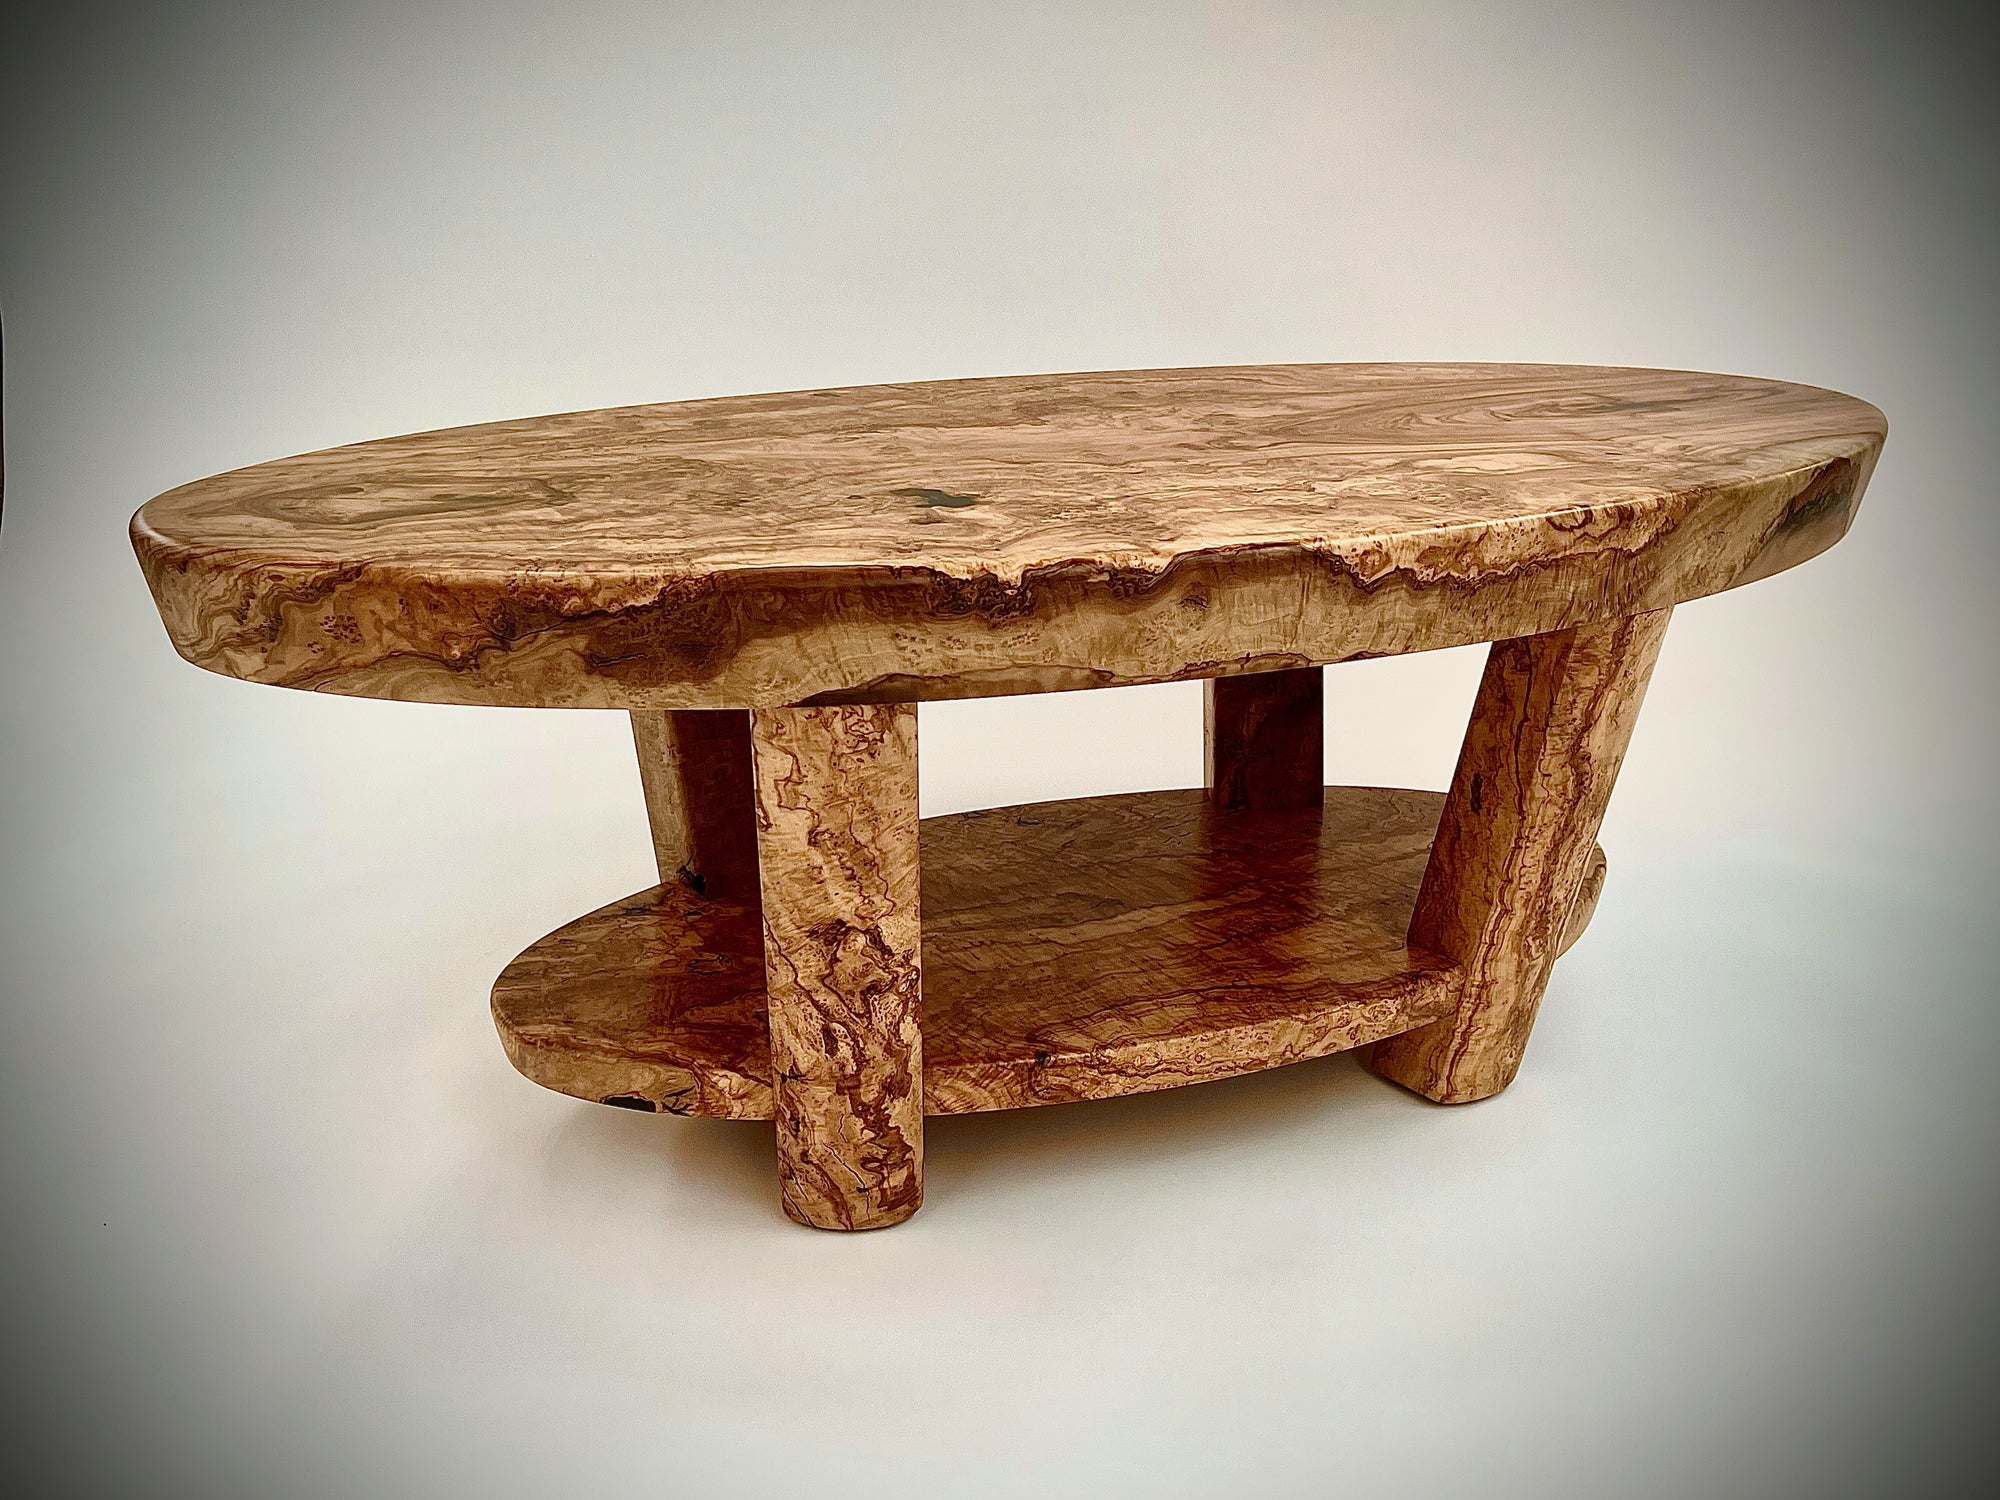 'One Woody Wombat' Low Table